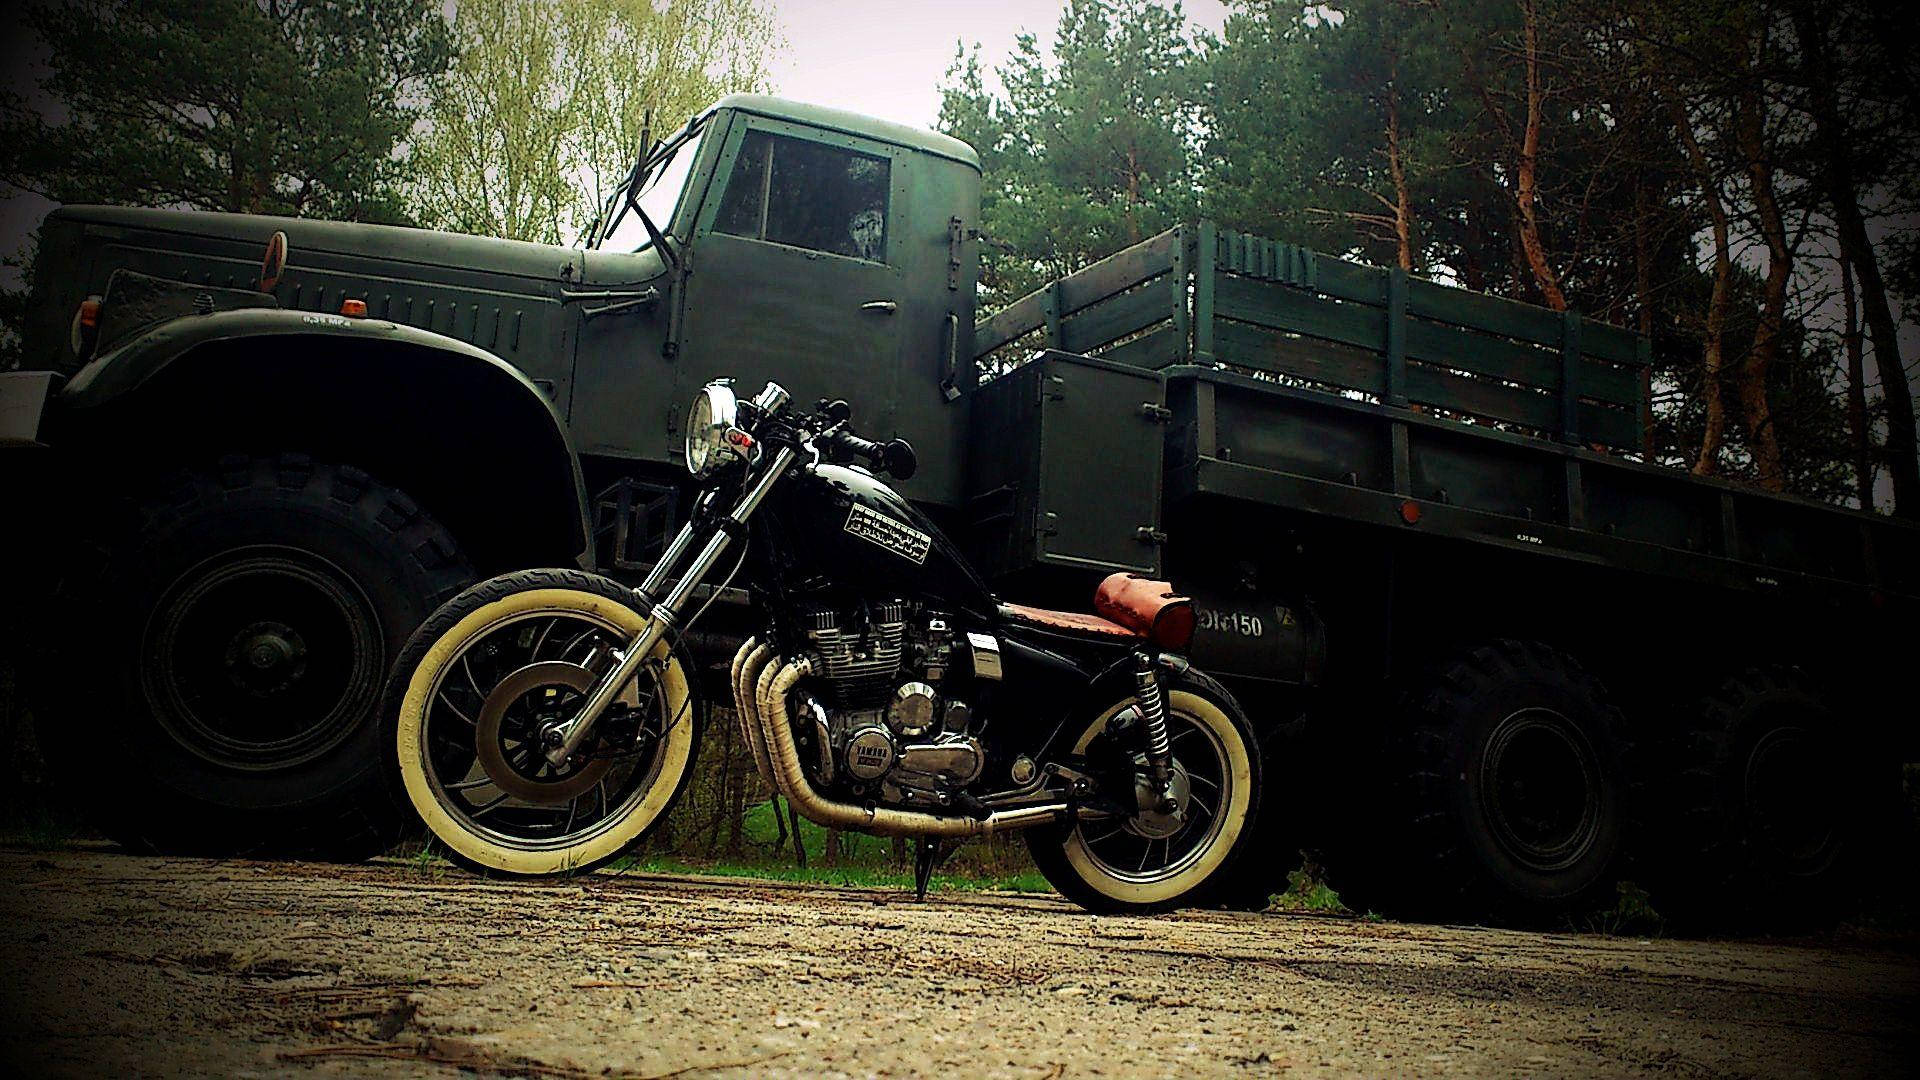 Bobber Motorcycle By An Army Truck Background